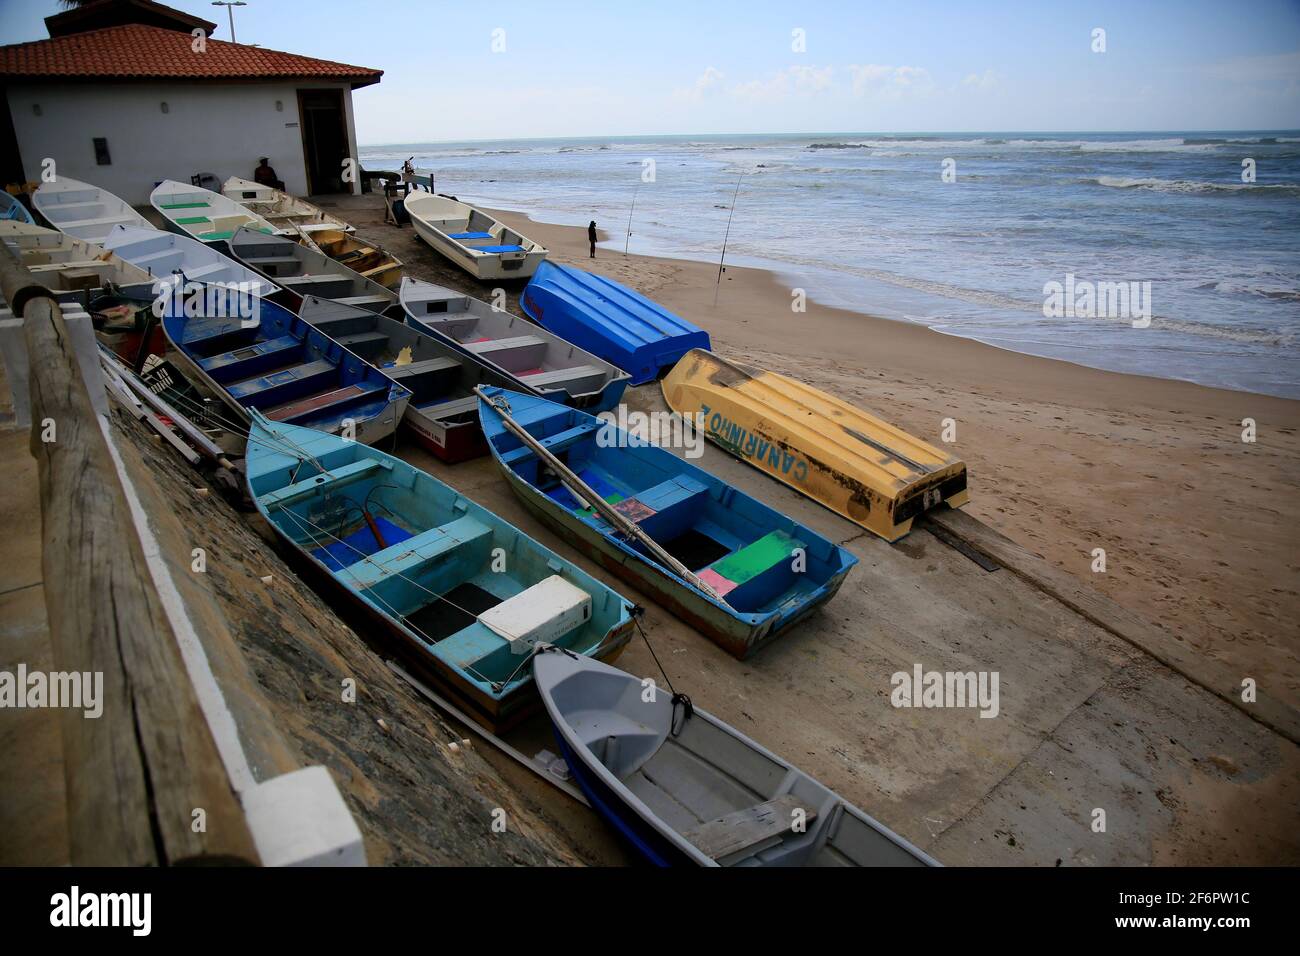 salvador, bahia / brazil - November 5, 2019: Boats are seen docked near the Fisherman's Colony in the Pituba neighborhood. Due to oil spill in the Bra Stock Photo